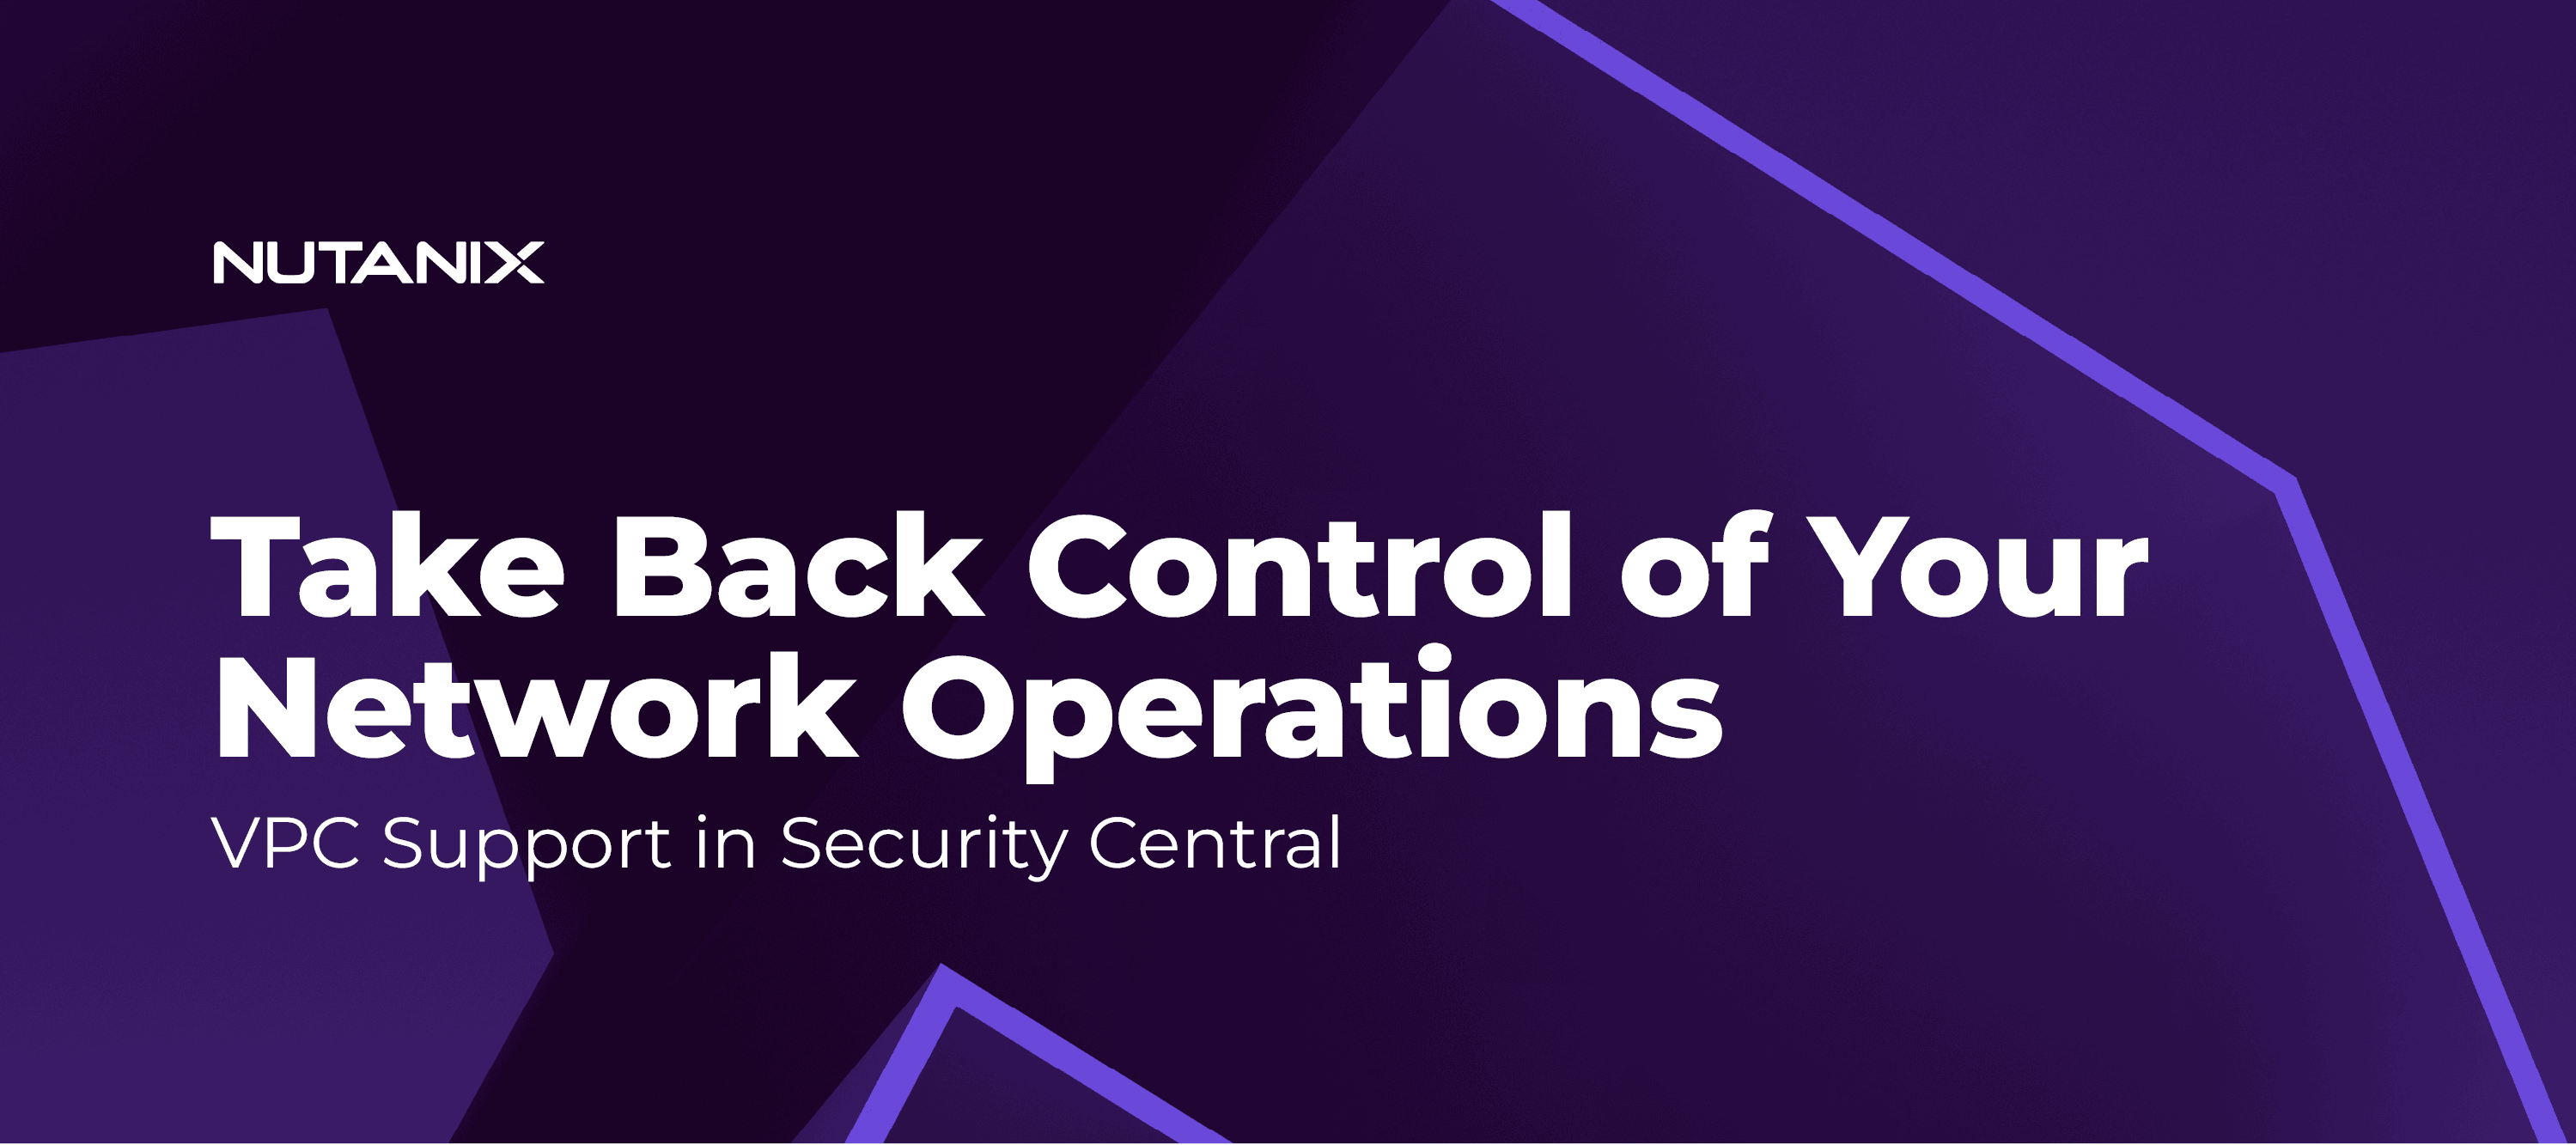 Take Back Control of Your Network Operations with VPC Support in Security Central